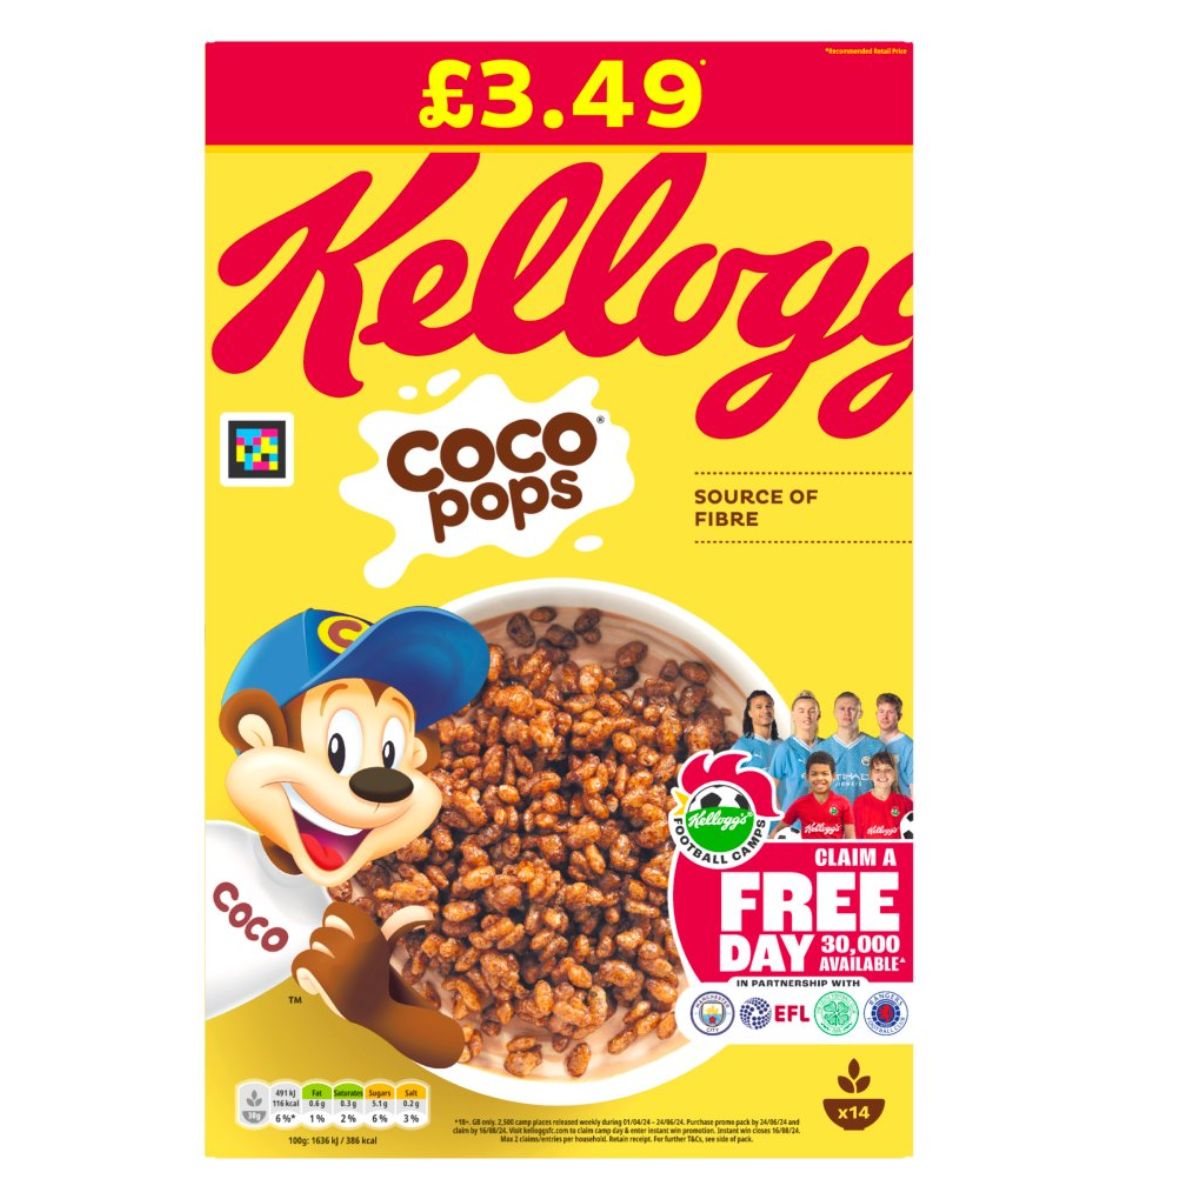 Kelloggs - Coco Pops - 420g cereal box displaying a price of £3.49, the mascot coco the monkey, and a promotional offer for a free day out.